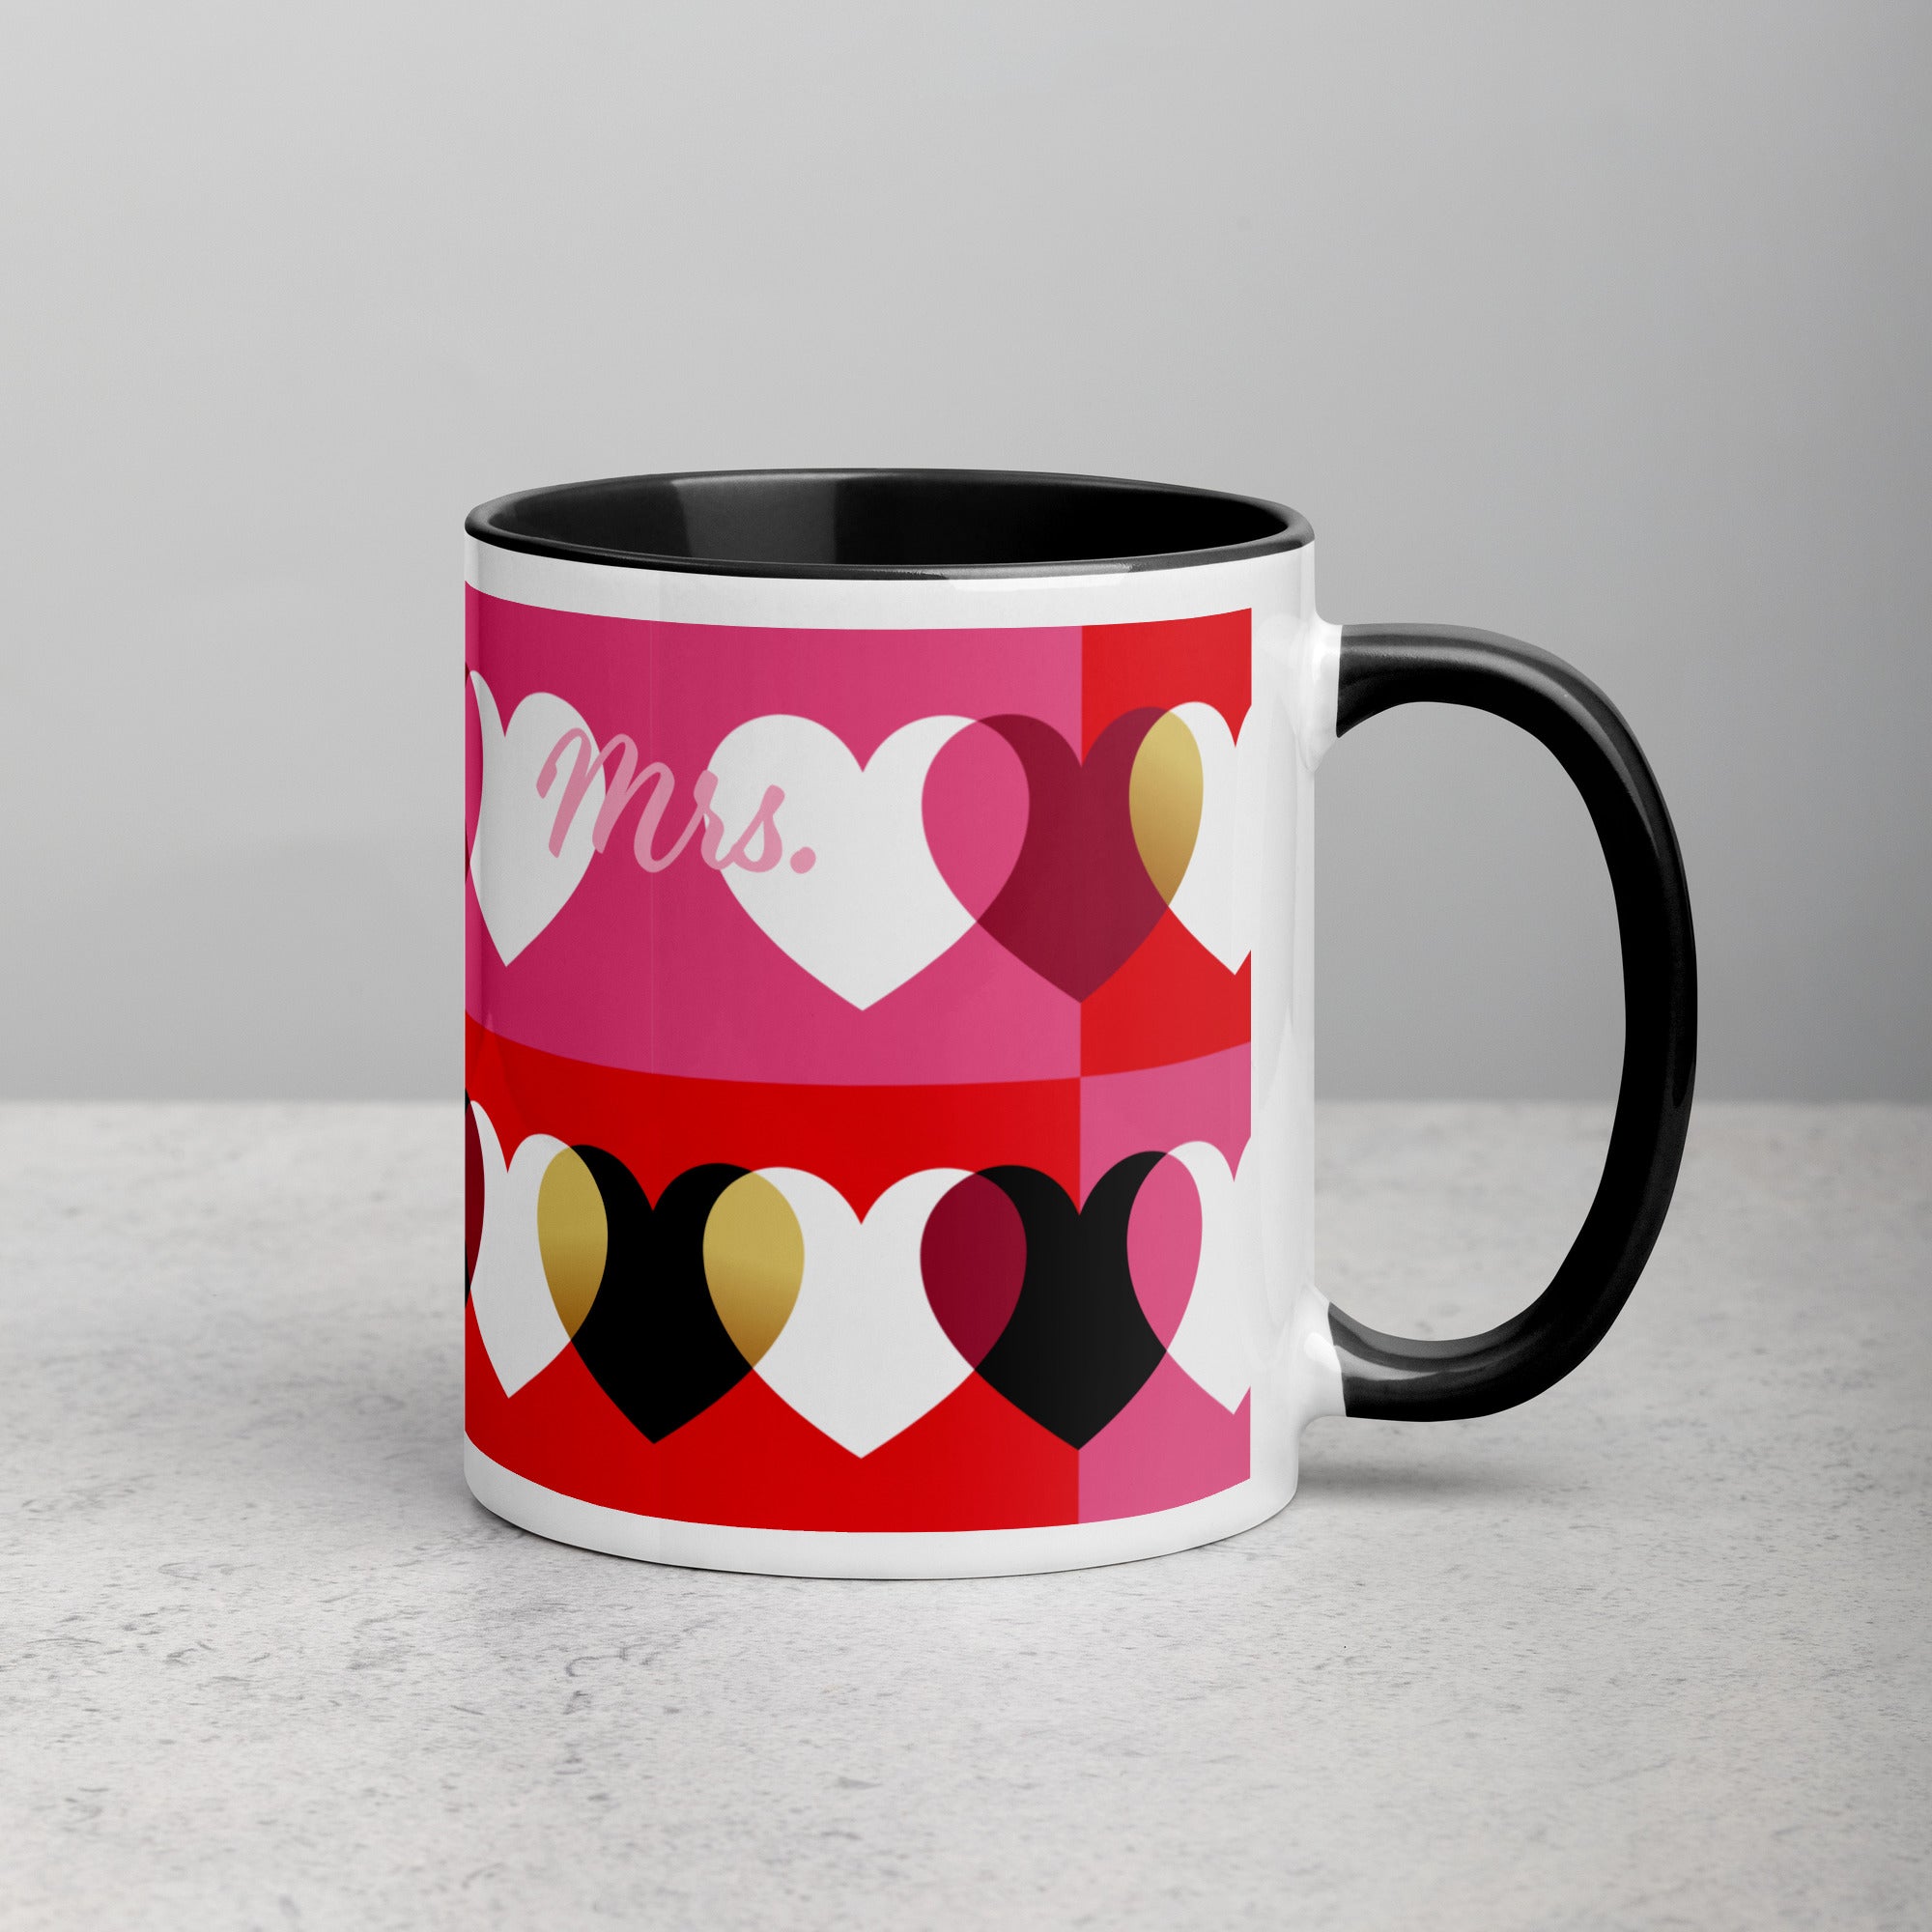 Love Mug set of 2, black and red, Mr. and Mrs, personalised-17